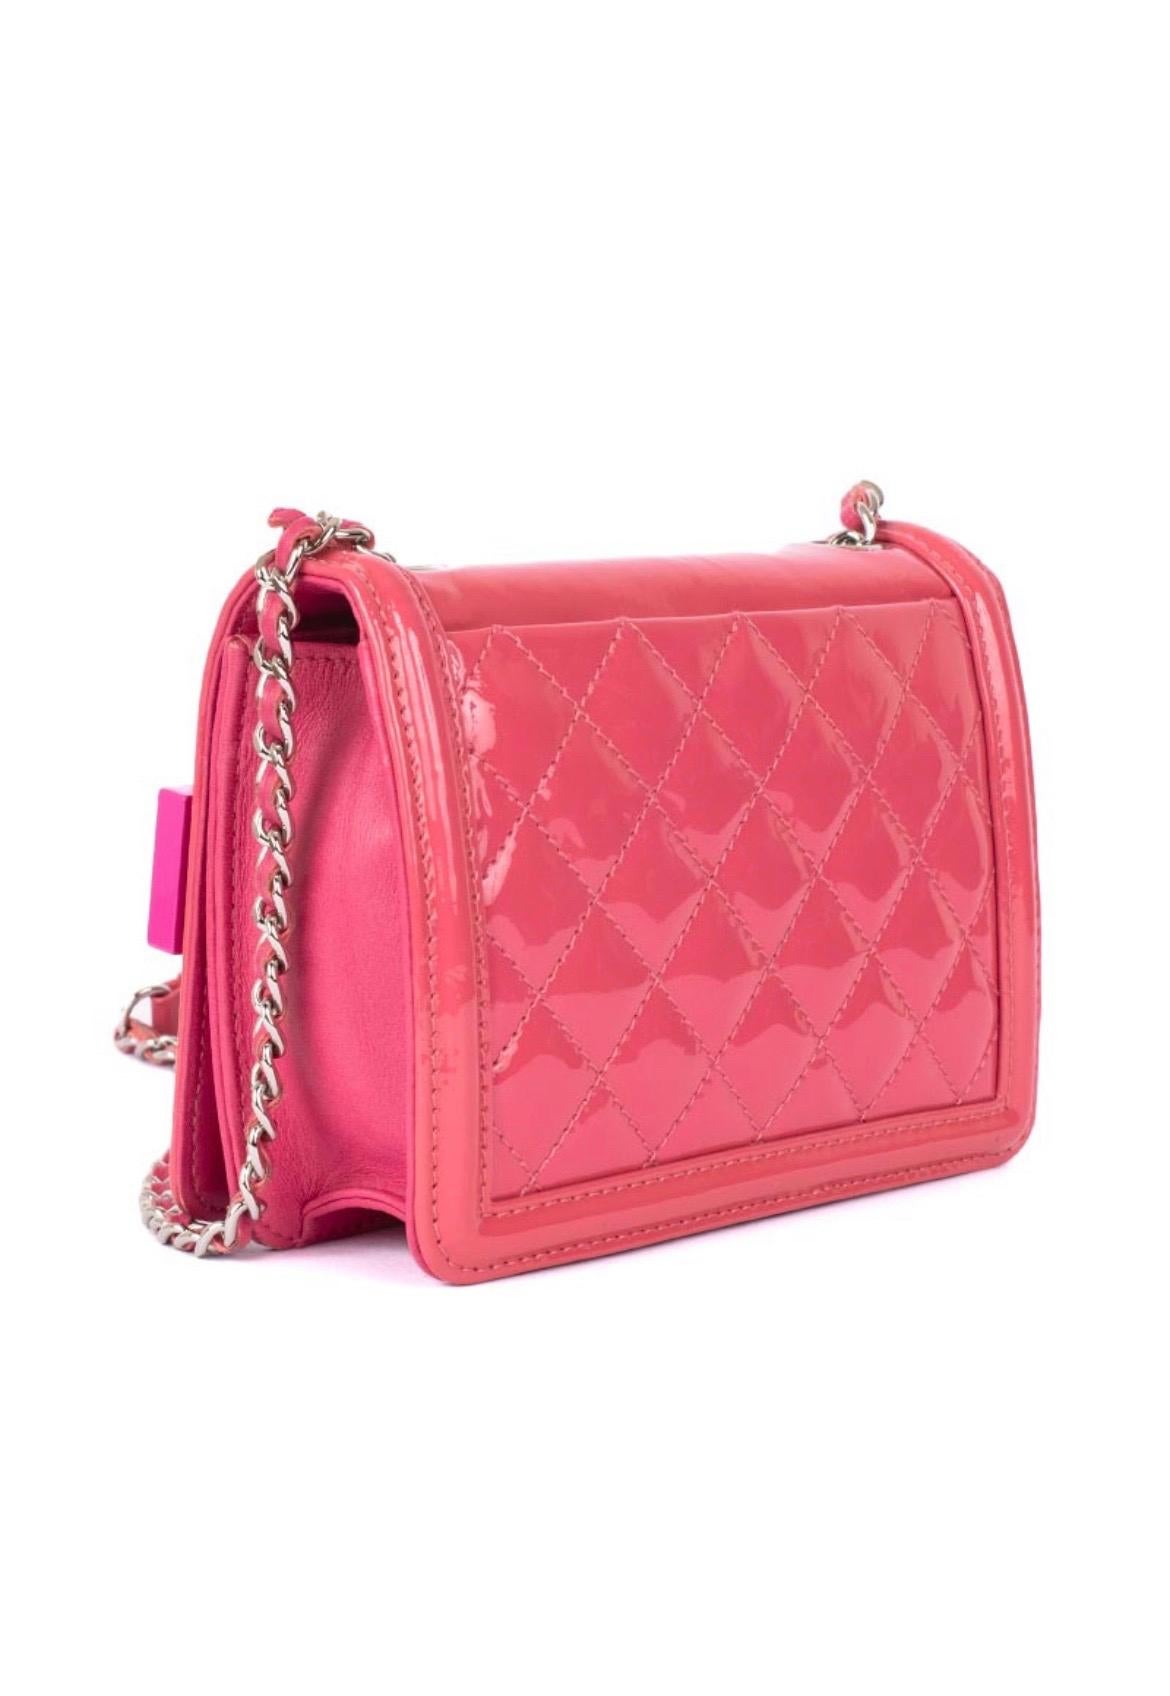 This rare Chanel lego brick mini flap in fluorescent pink and orange belonging to the Chanel S/S 2014 collection, is made of warm pink quilted painted leather with plexiglass plates on the front. It can be worn on the shoulder, shoulder strap or as